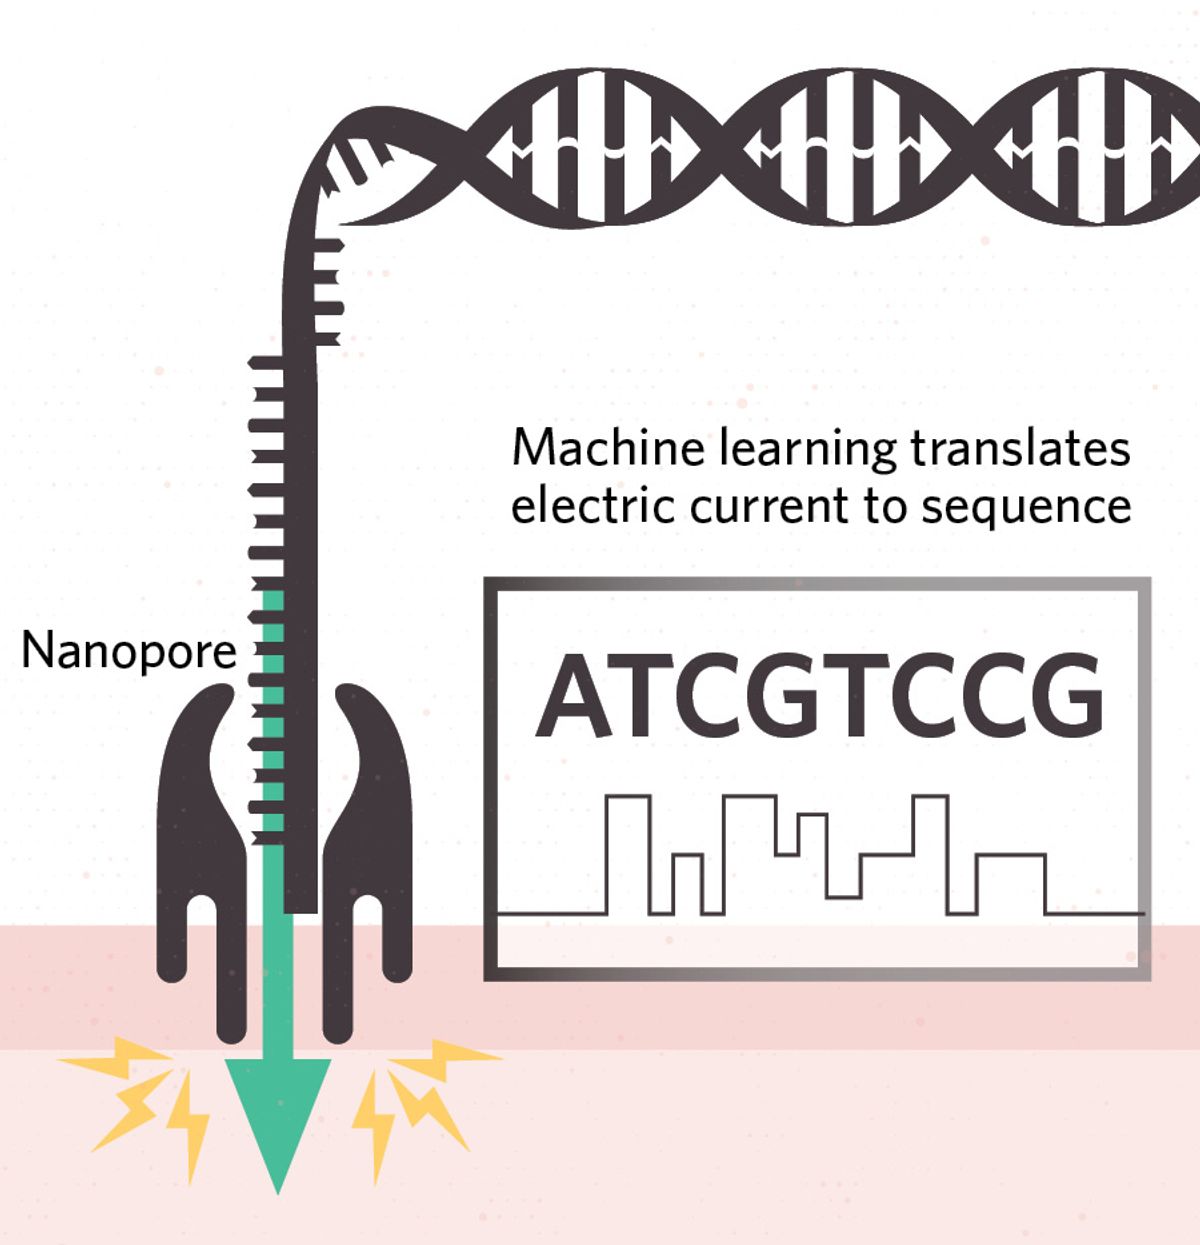 Illustration showing nanopore sequencing